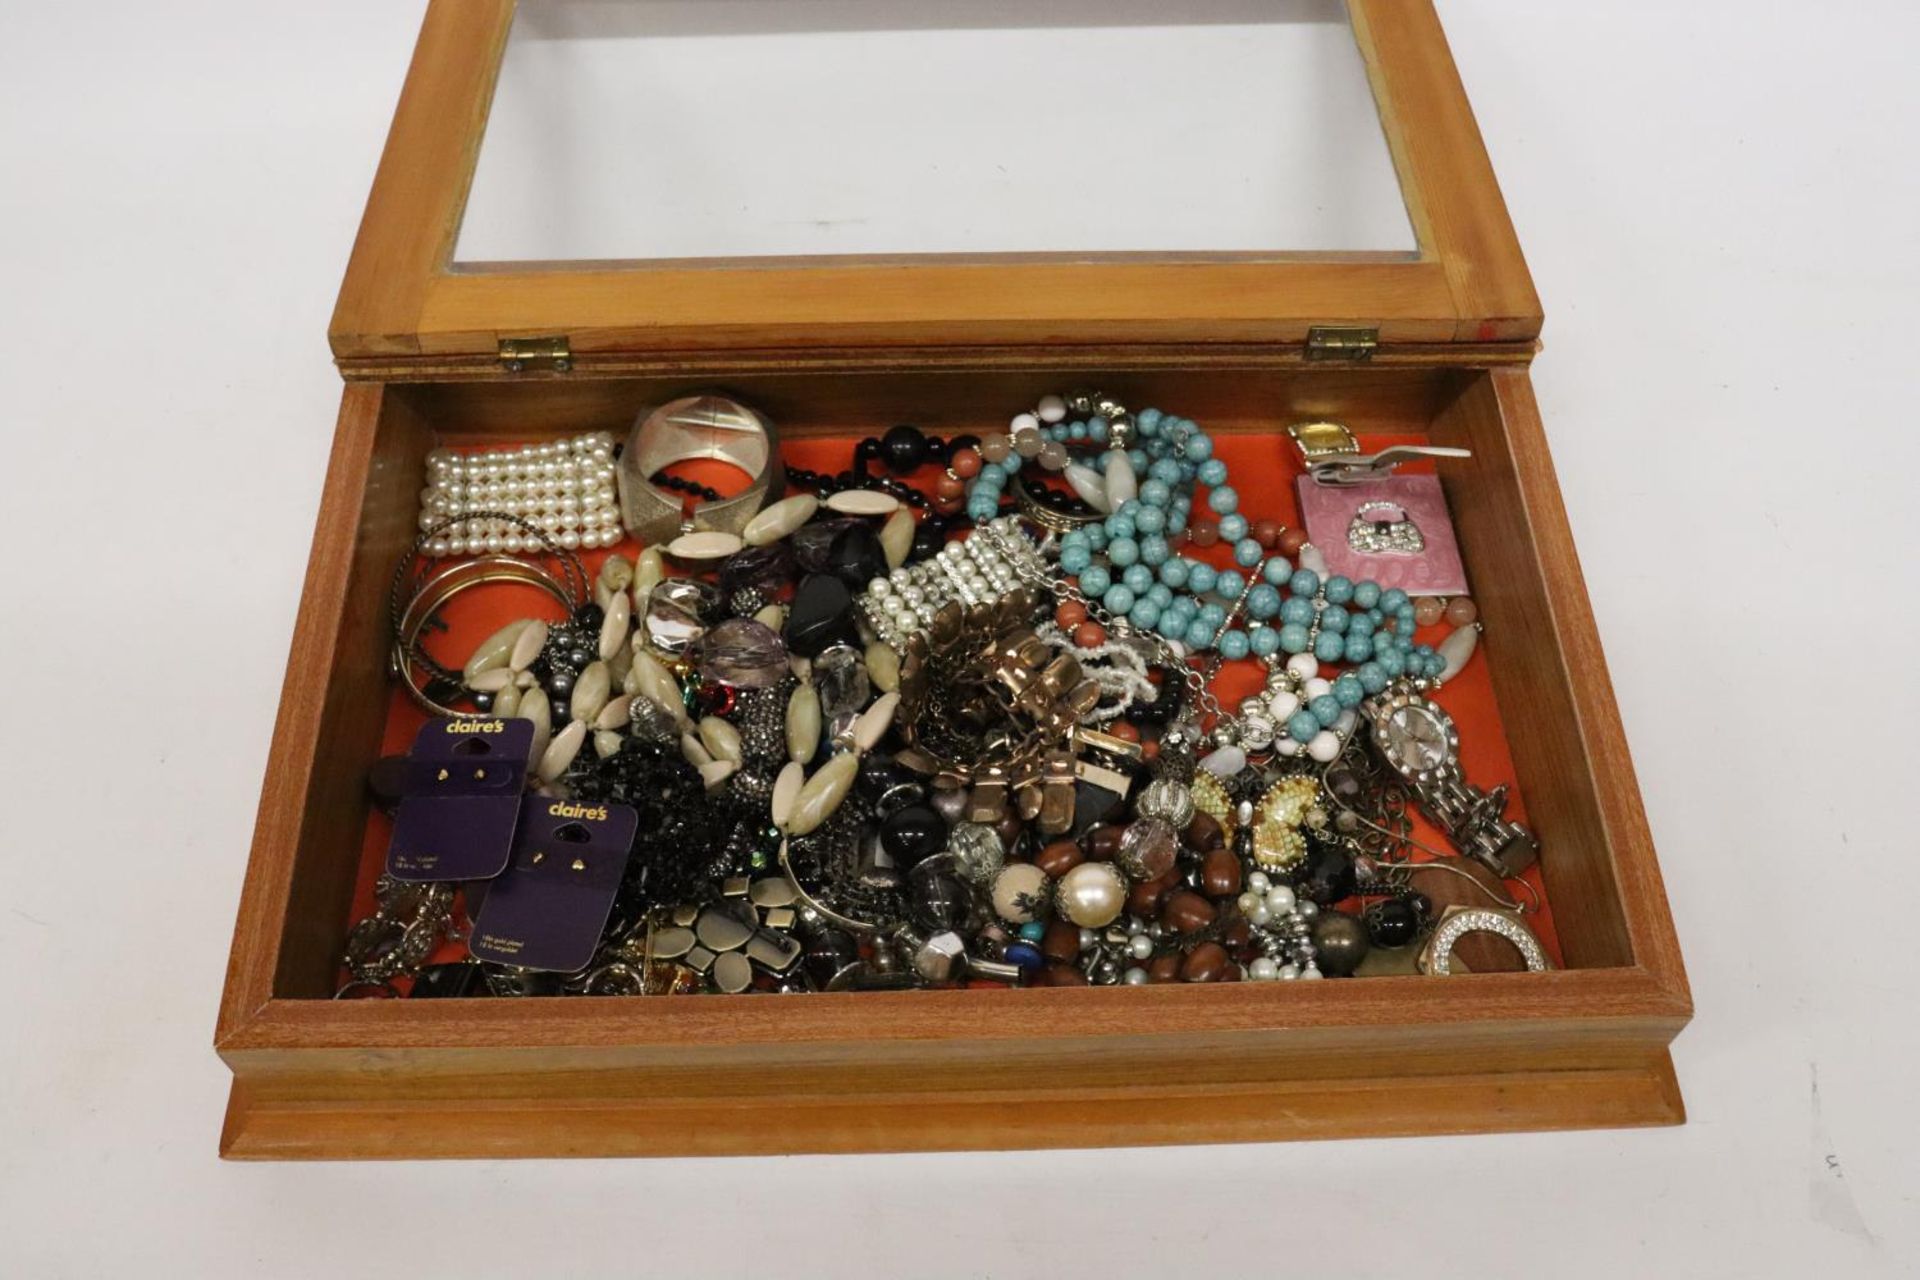 A QUANTITY OF COSTUME JEWELLERY IN A GLASS TOPPED DISPLAY CASE - Image 6 of 6